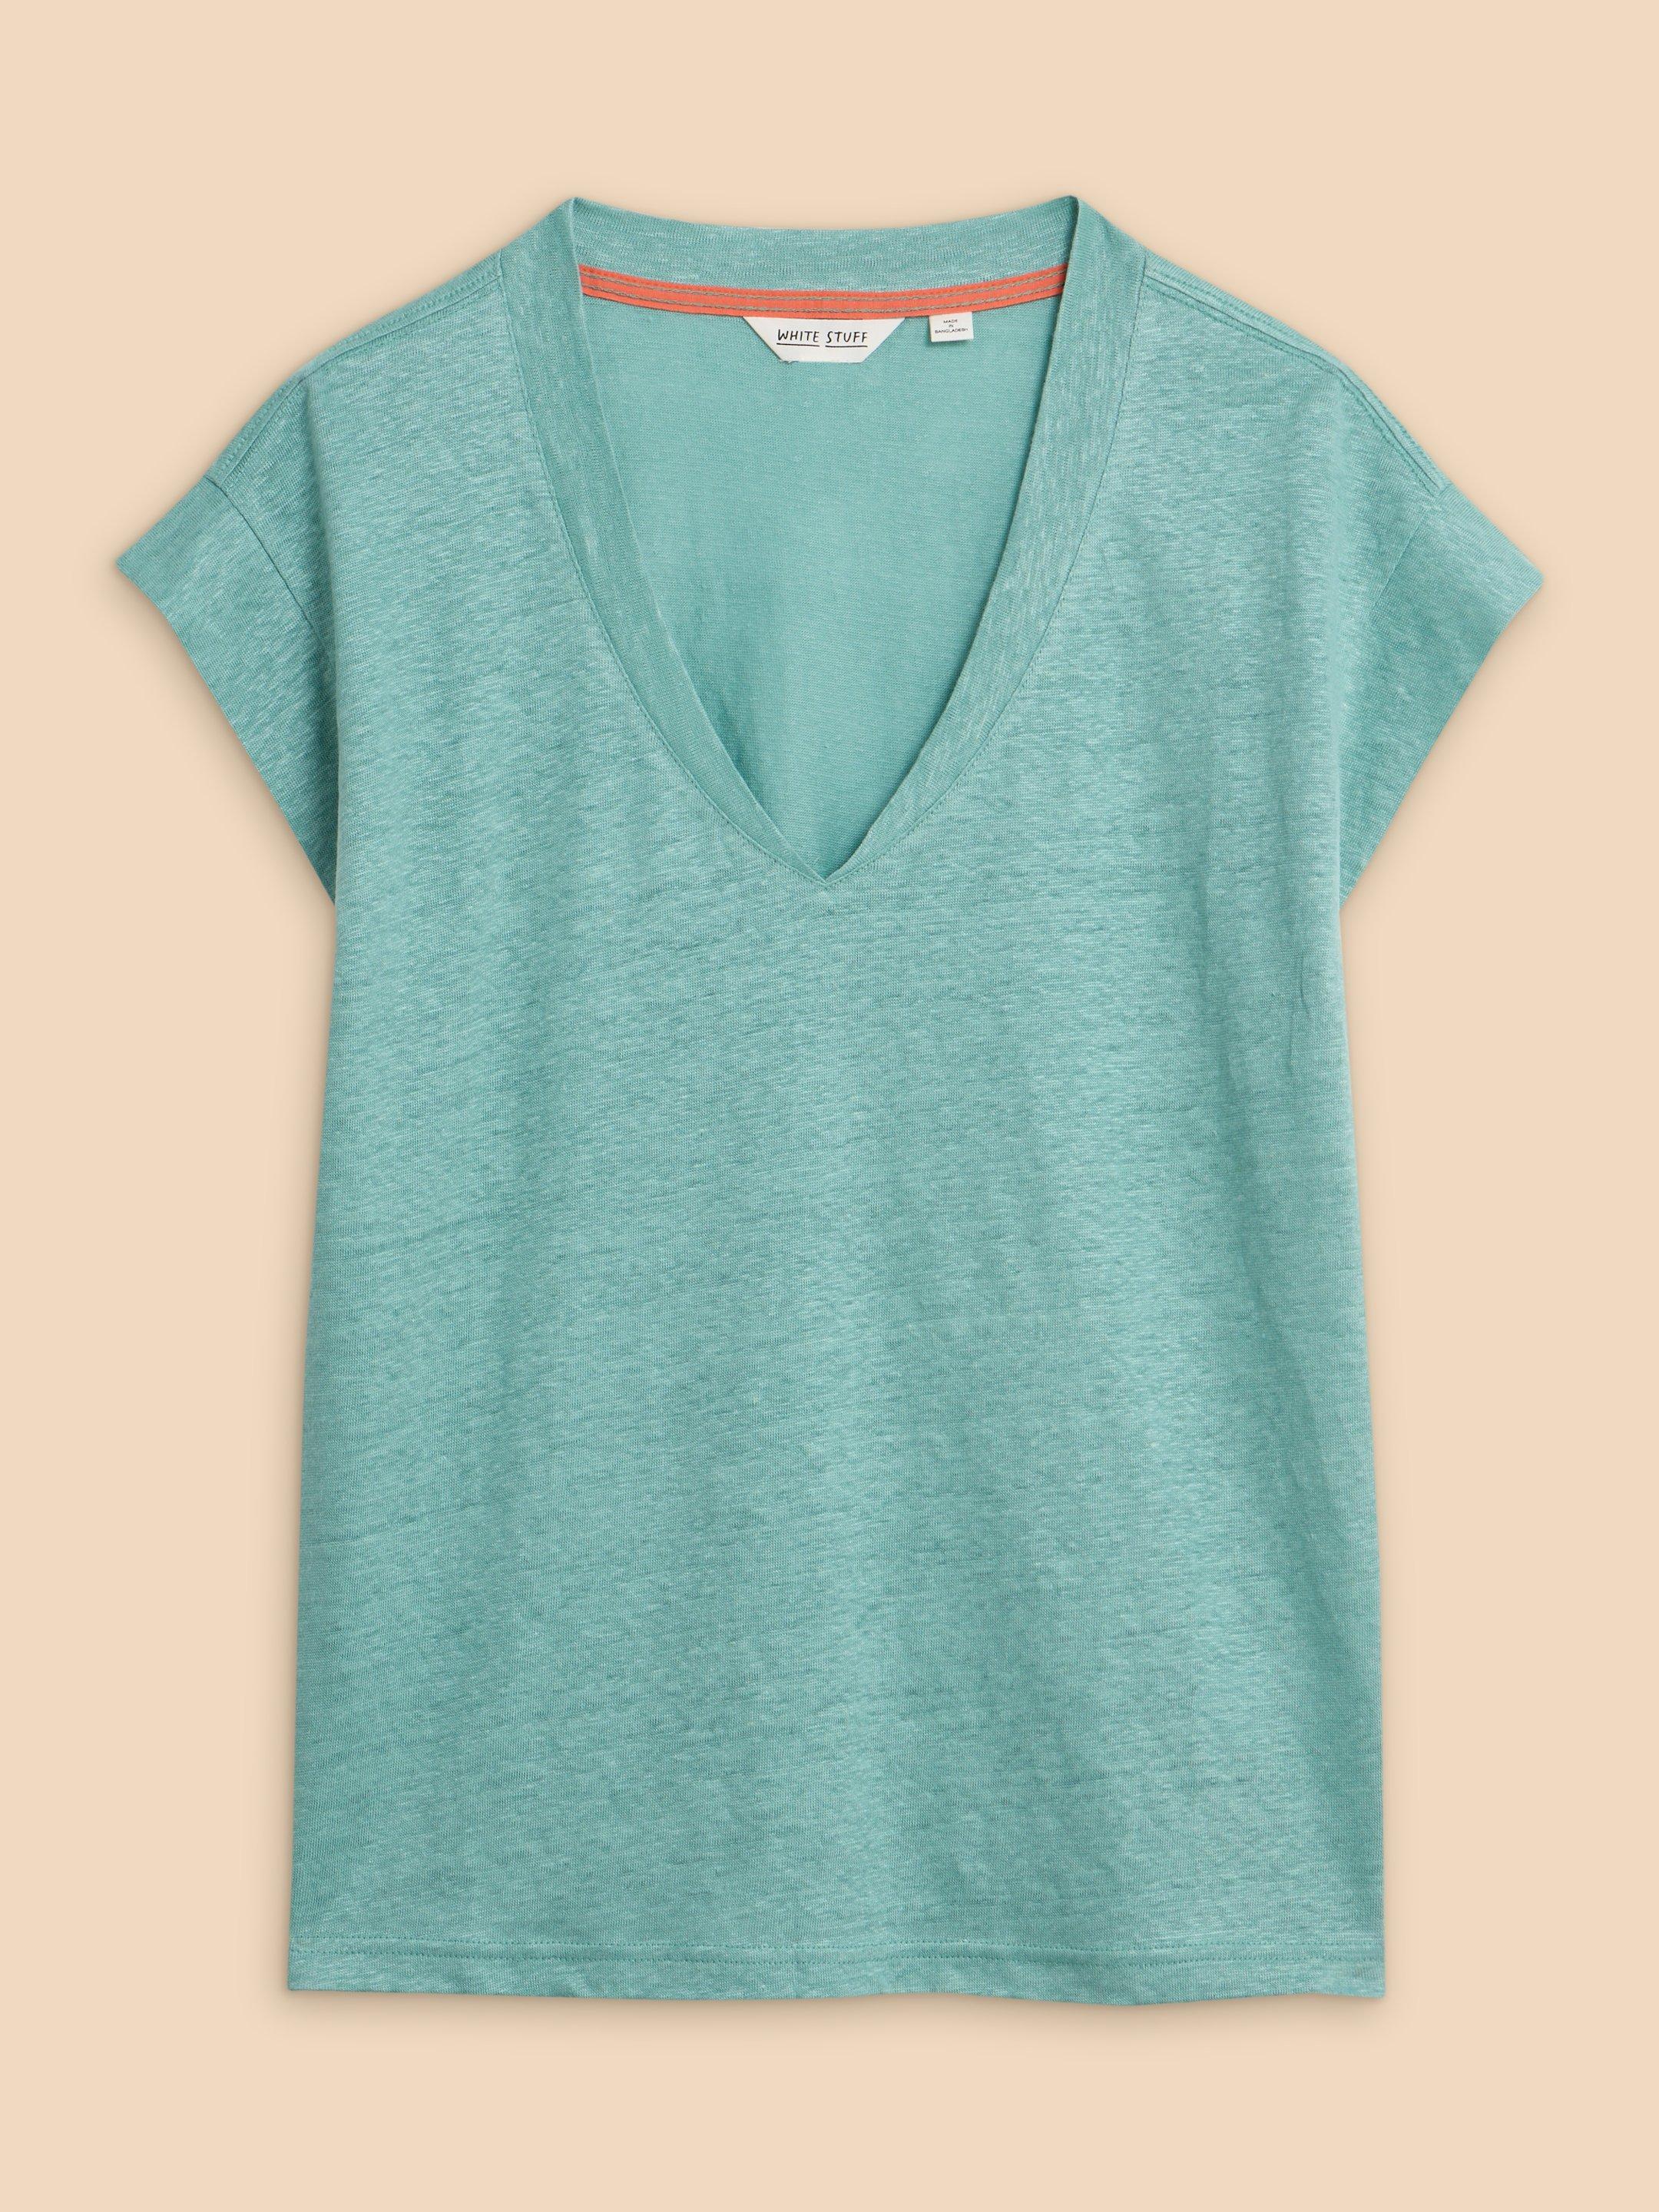 IVY V NECK LINEN TEE in MID TEAL - FLAT FRONT